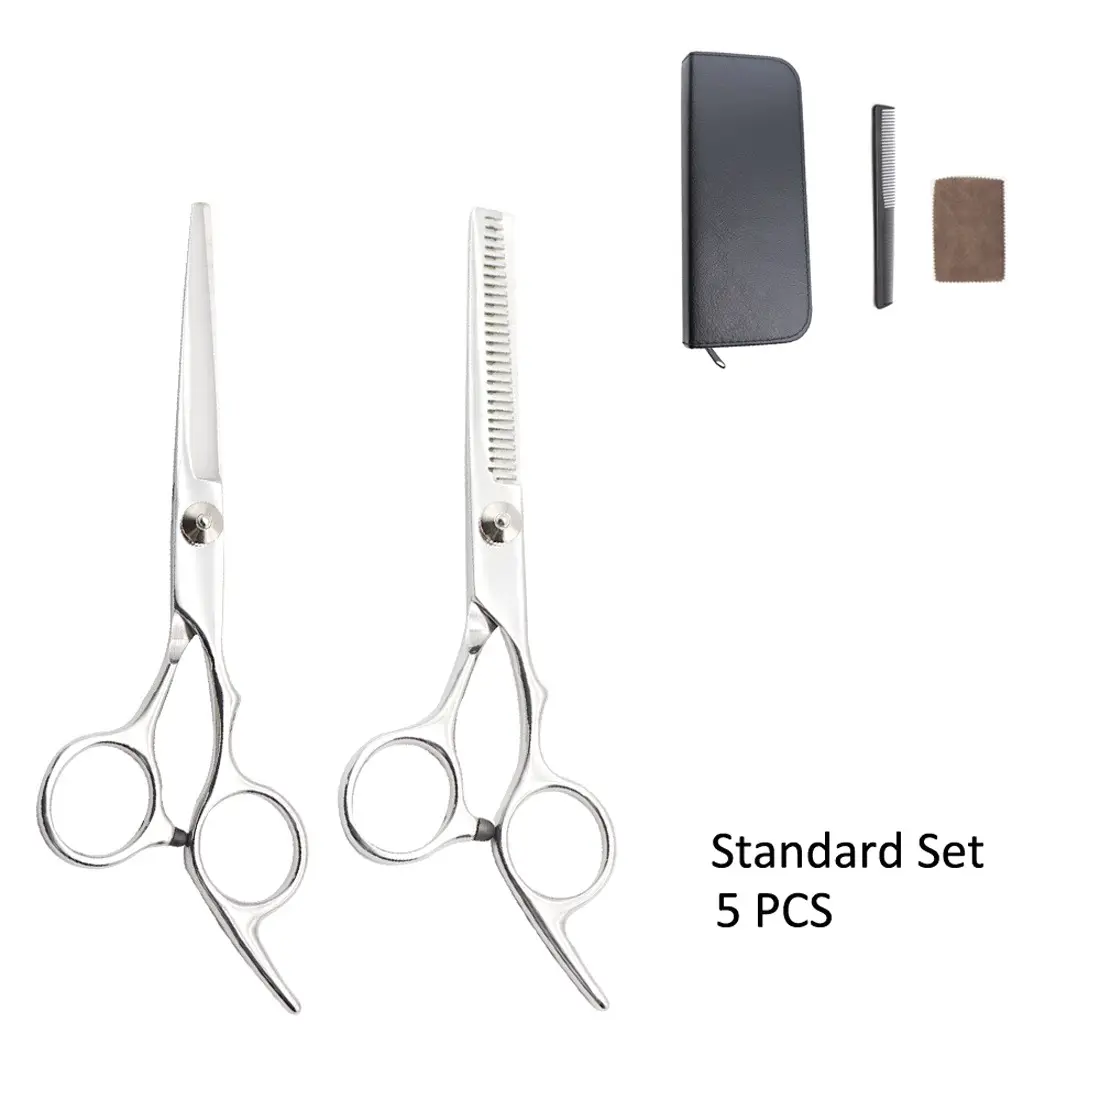 Professional Black Color Gold Screw Hair Cutting Thinning Hairdressing 6 inch Scissors Barber Set